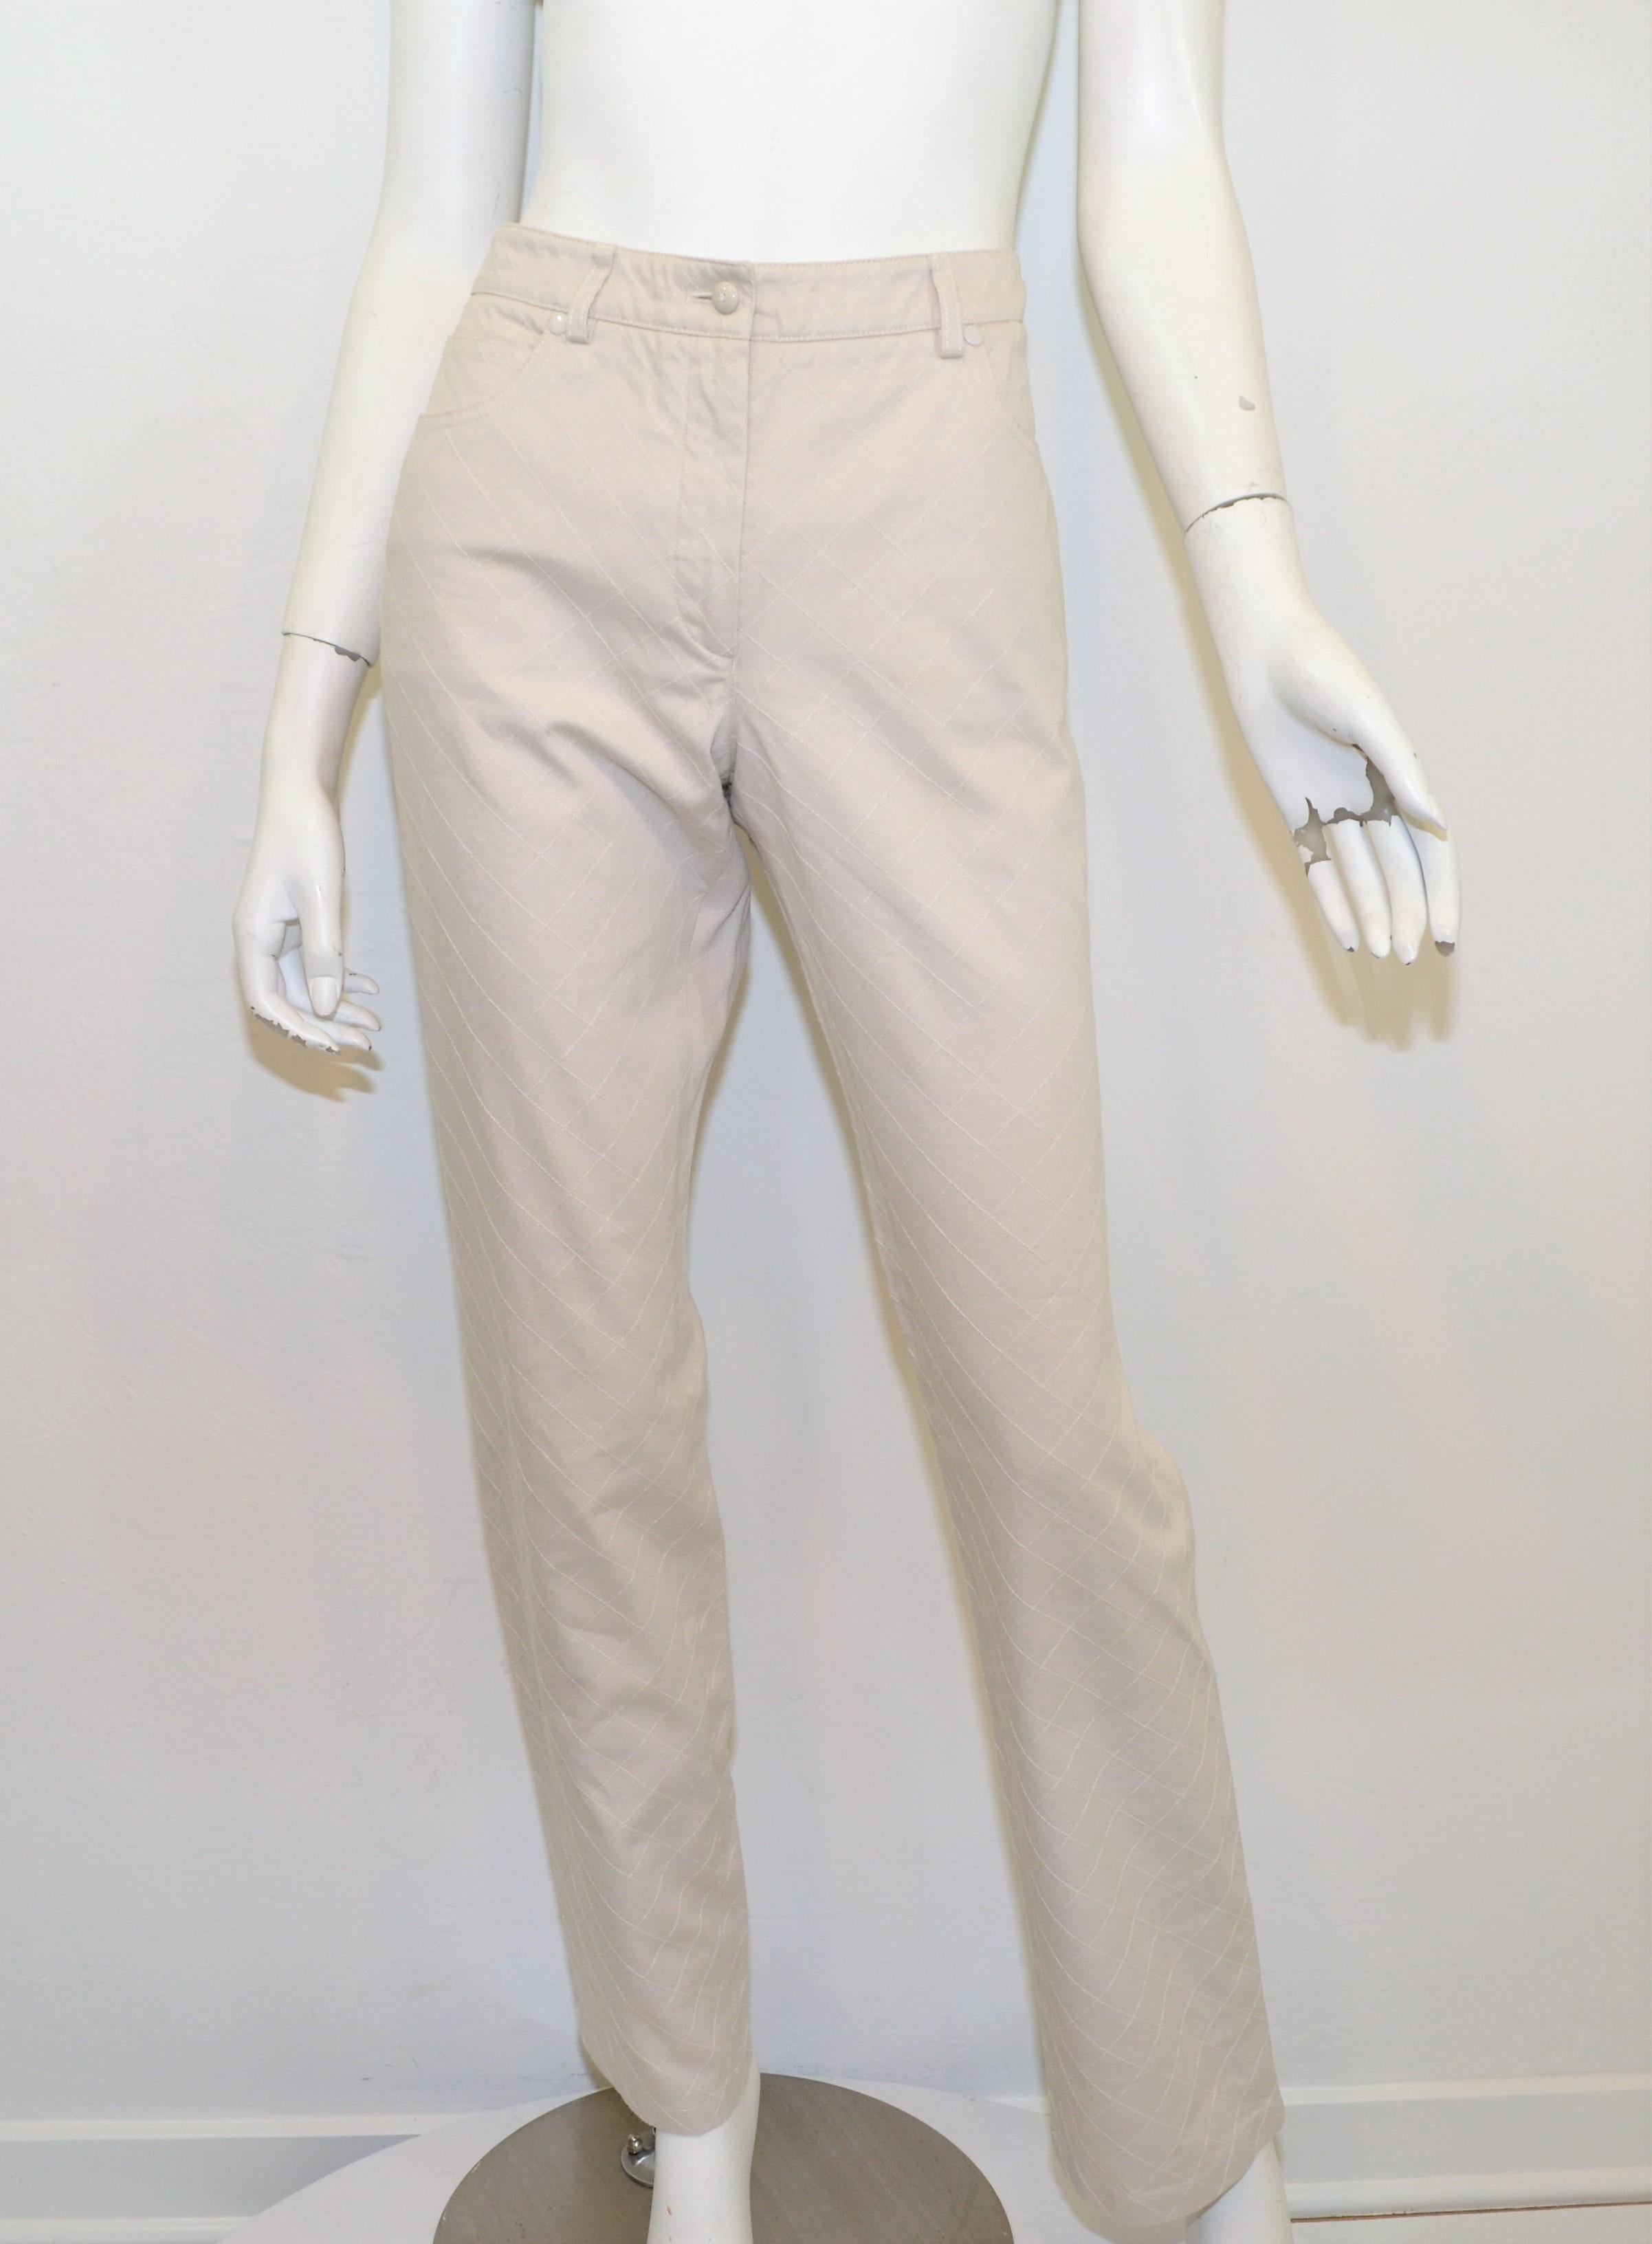 Chanel Beige Denim Pants features diamond-stitch work with a zipper and button fastening with three functioning pockets at the front and two on the back. Jeans are a size 42 -- Measurements are as follows:

Waist 33''
Hips 38''
Inseam 32''
Rise